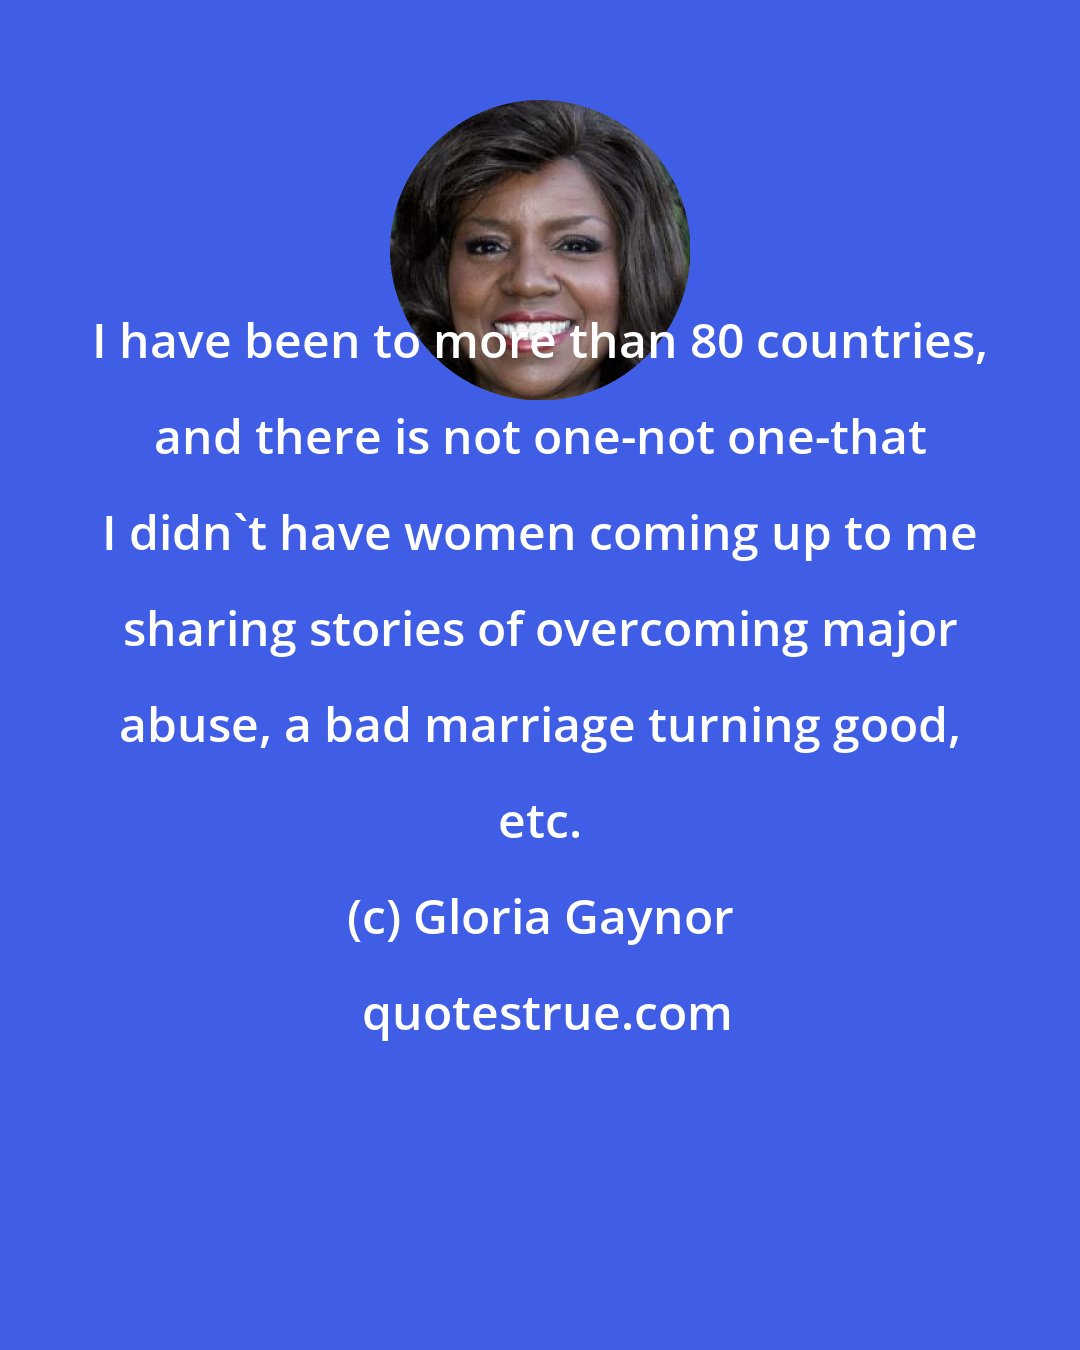 Gloria Gaynor: I have been to more than 80 countries, and there is not one-not one-that I didn't have women coming up to me sharing stories of overcoming major abuse, a bad marriage turning good, etc.